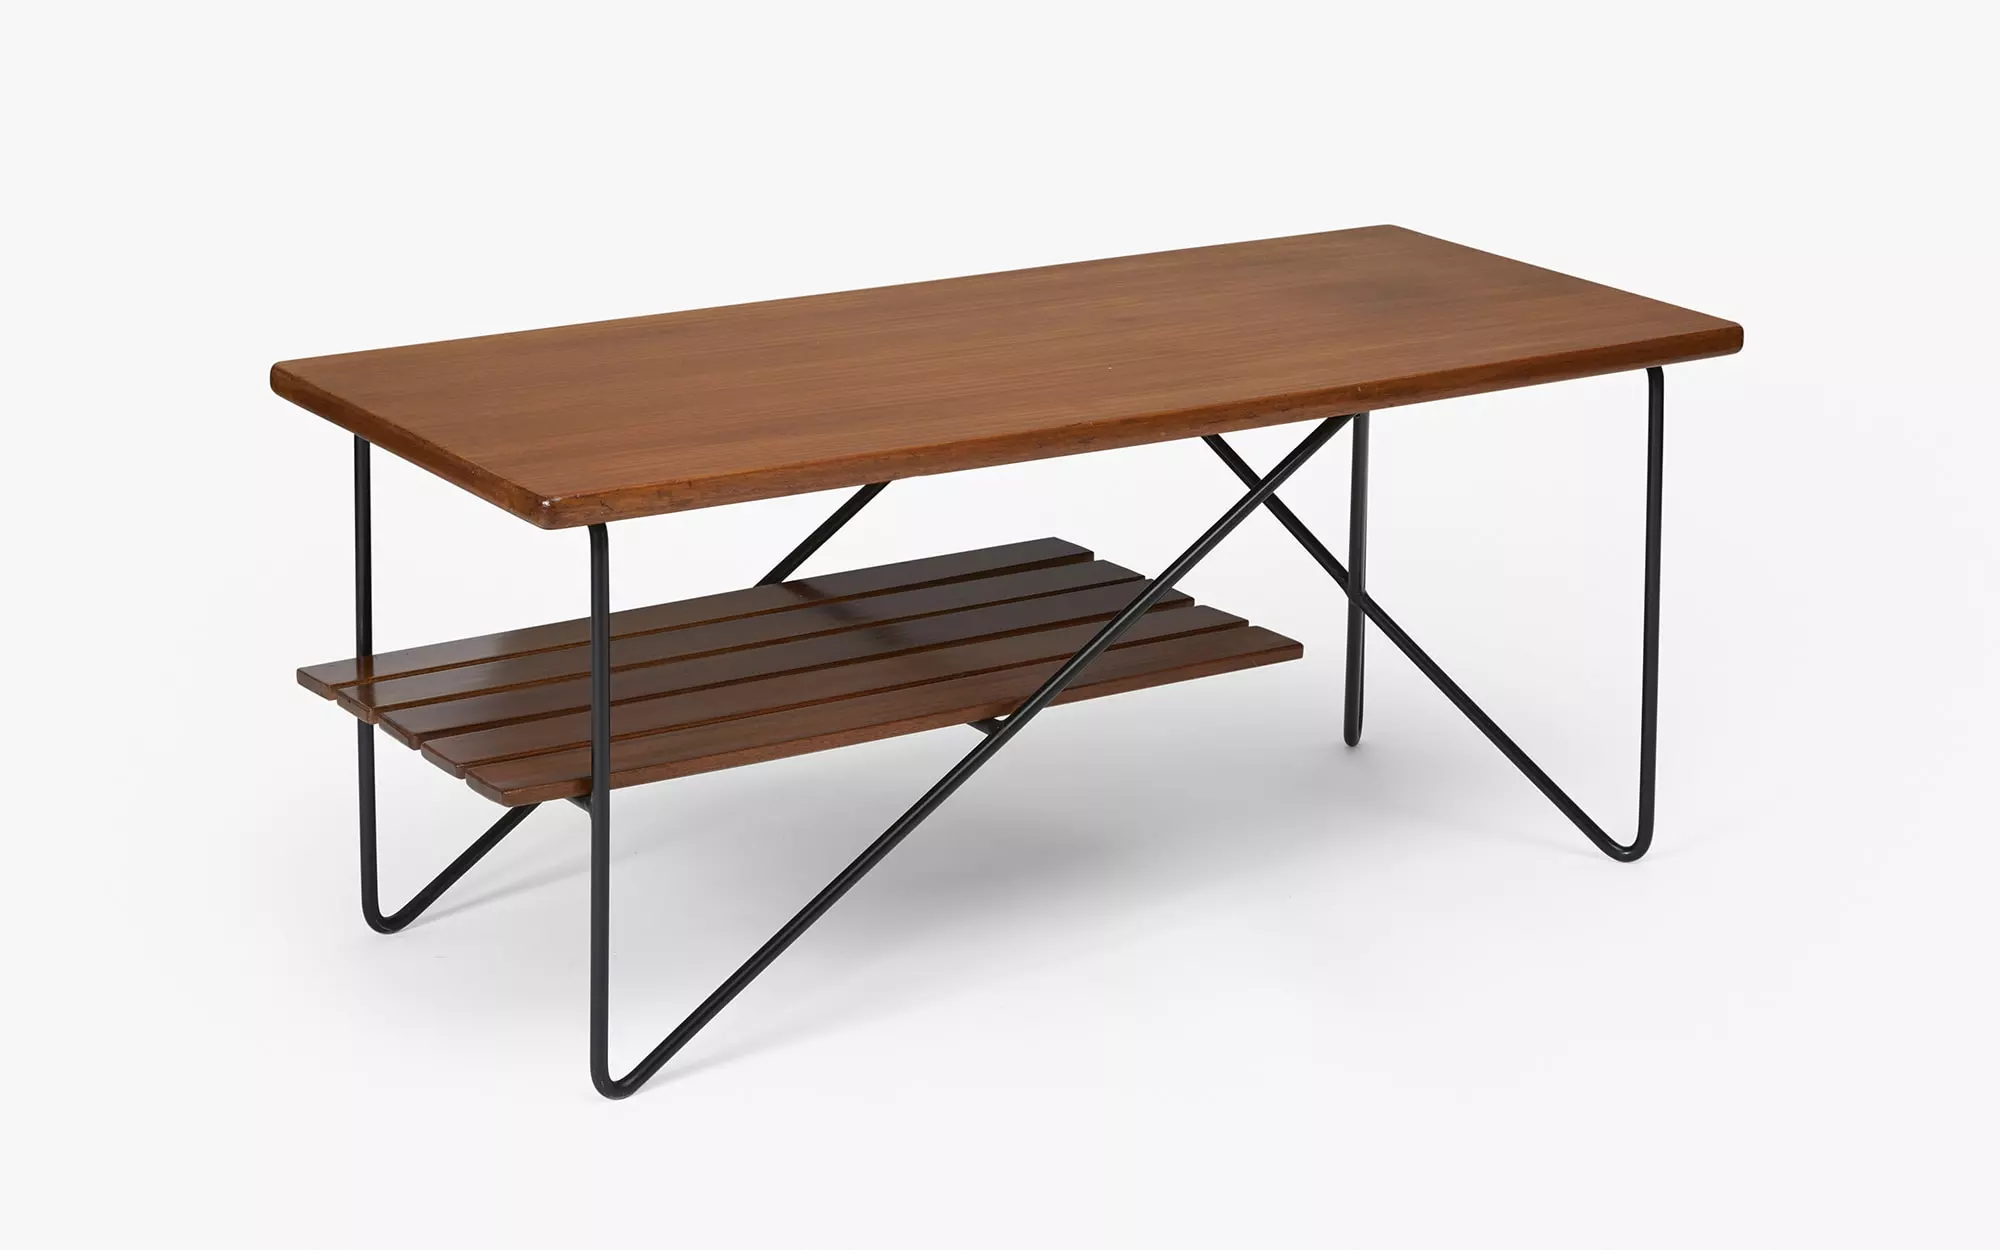 GC56 coffee table - René-Jean Caillette - Coffee table - Galerie kreo